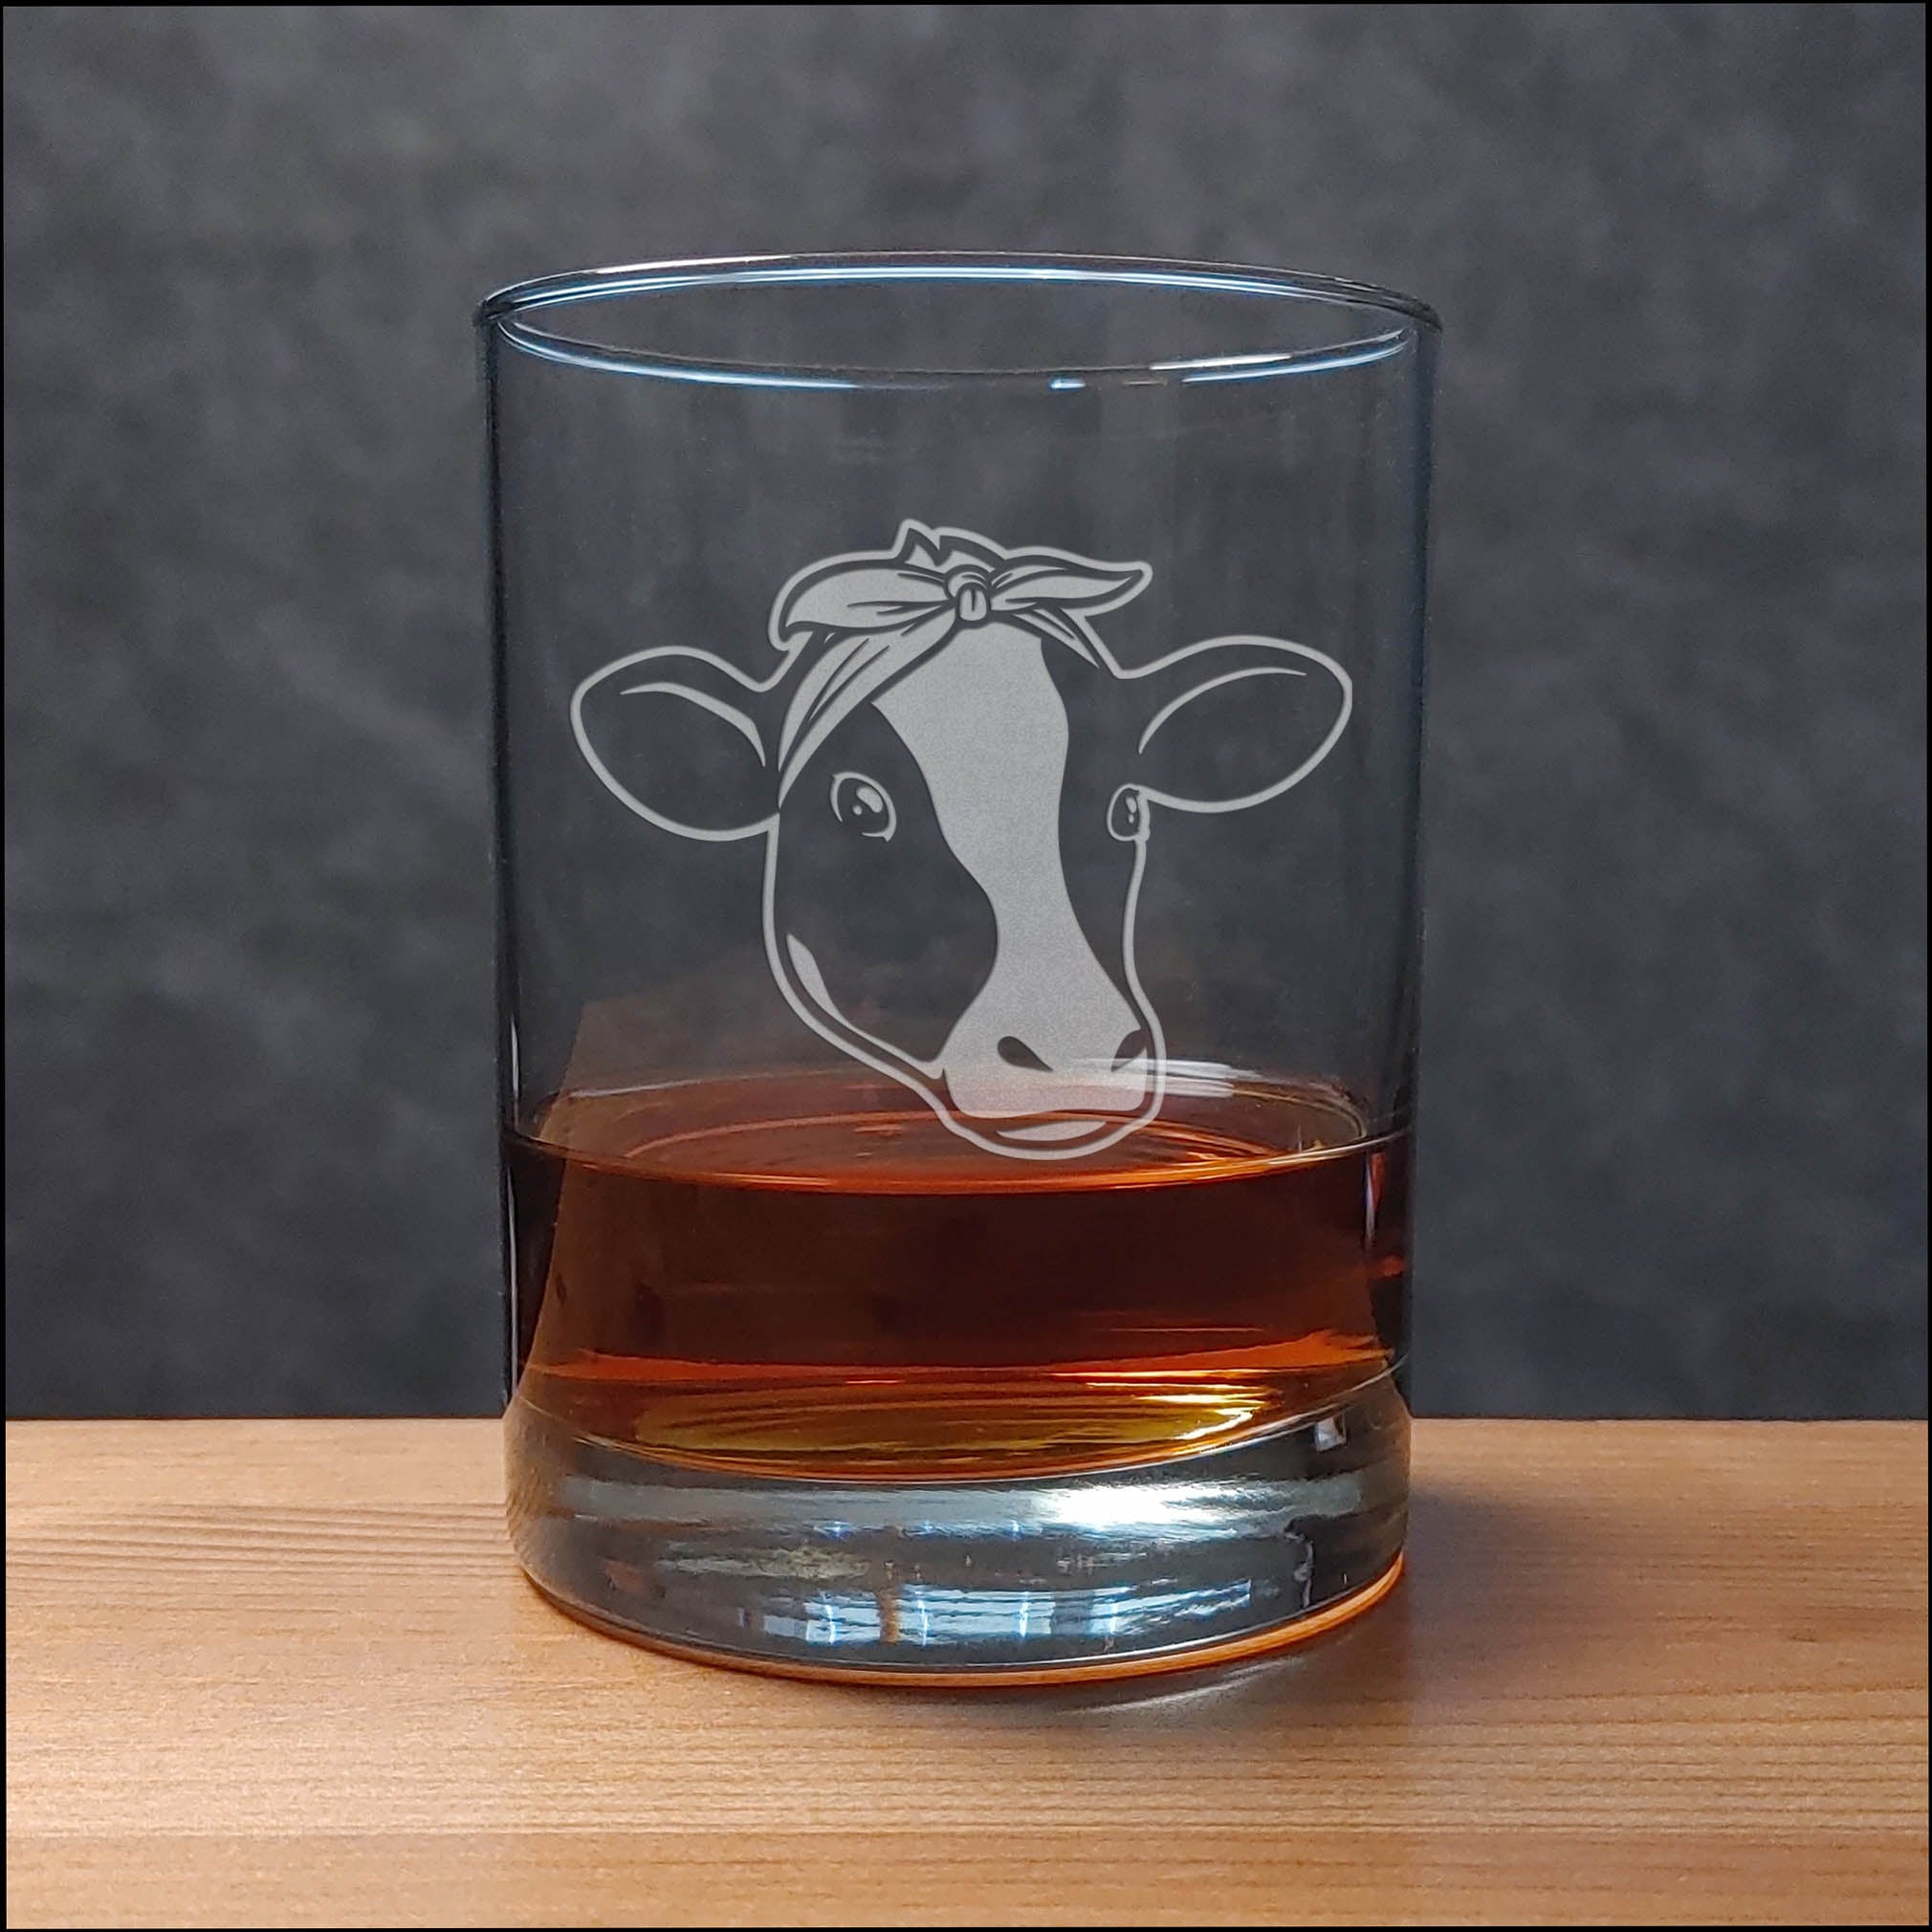 Cow Face with Bandana 13 oz Whisky Glass - Copyright Hues in Glass